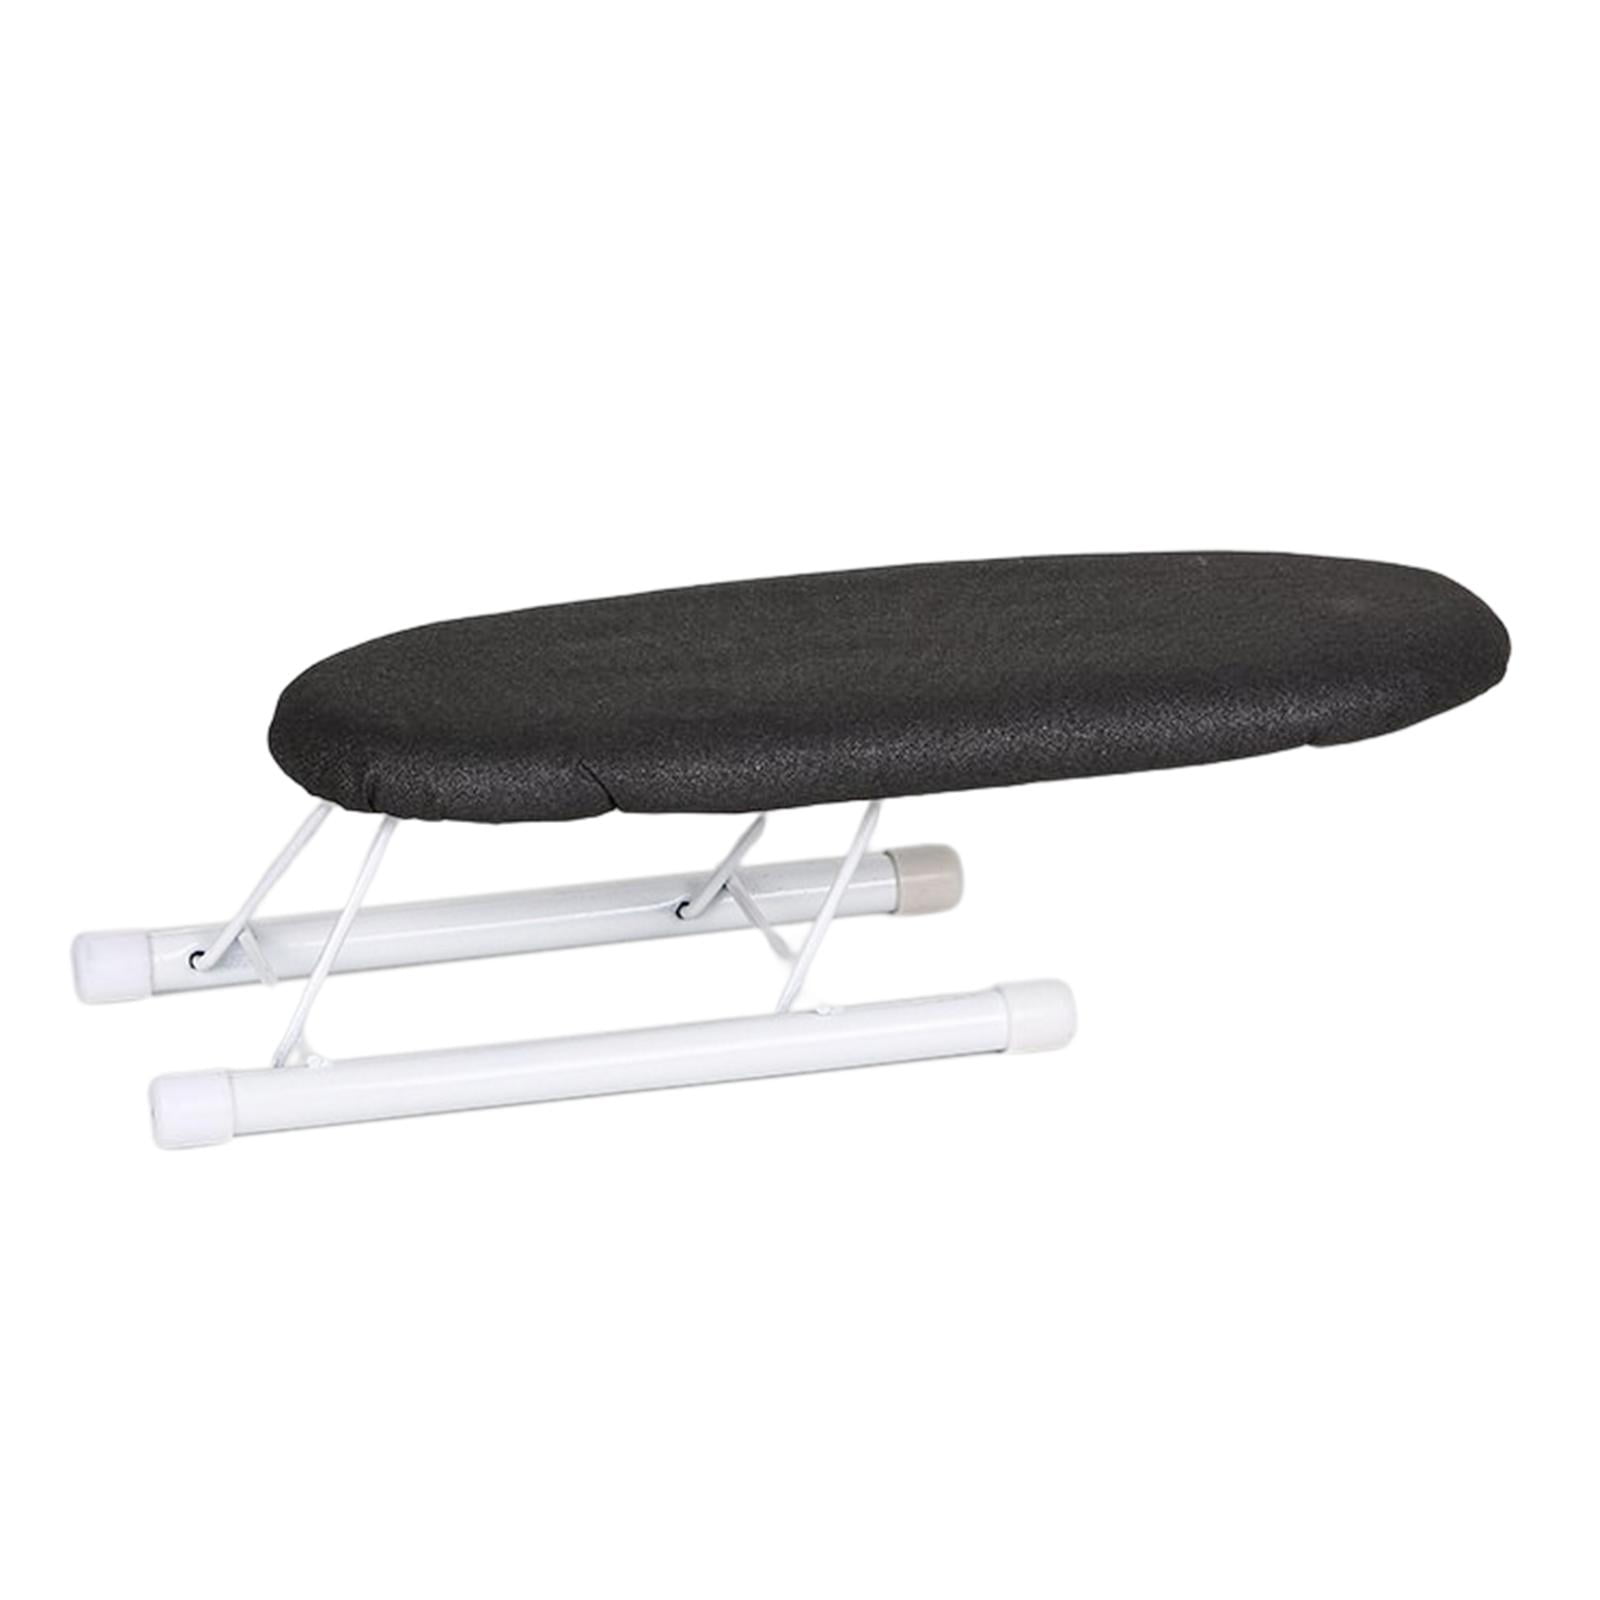 Dropship 1pc Mini Ironing Board, Ironing Gloves, Hanging Ironing Machine  Small Ironing Board to Sell Online at a Lower Price